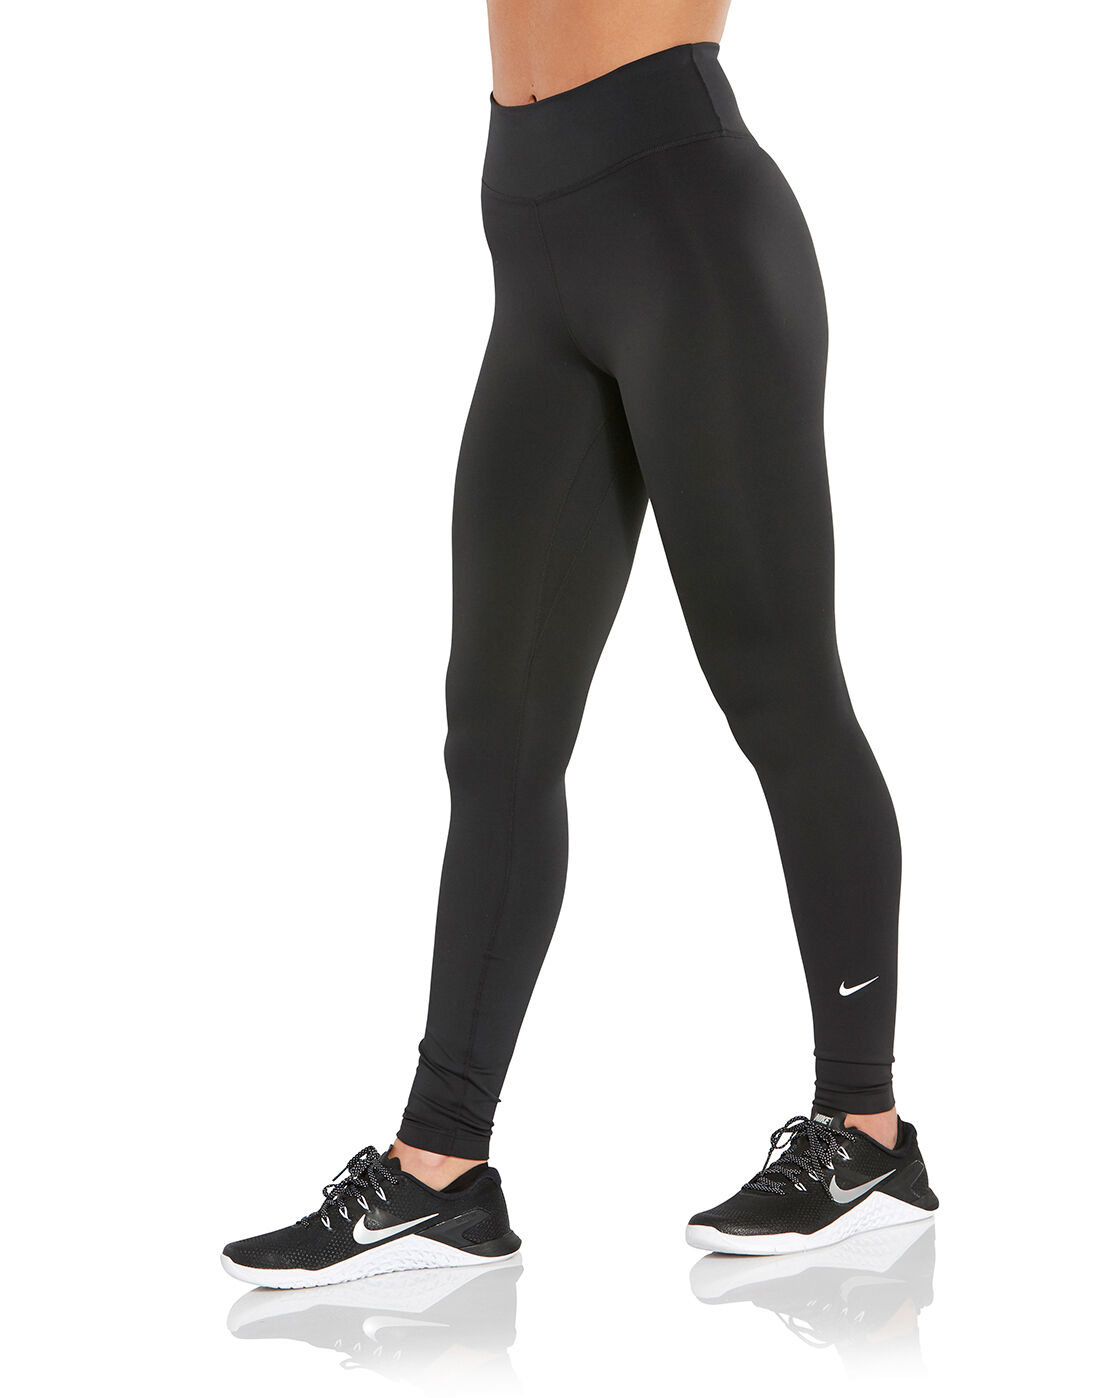 Women's Black Nike All-In-One Tights 